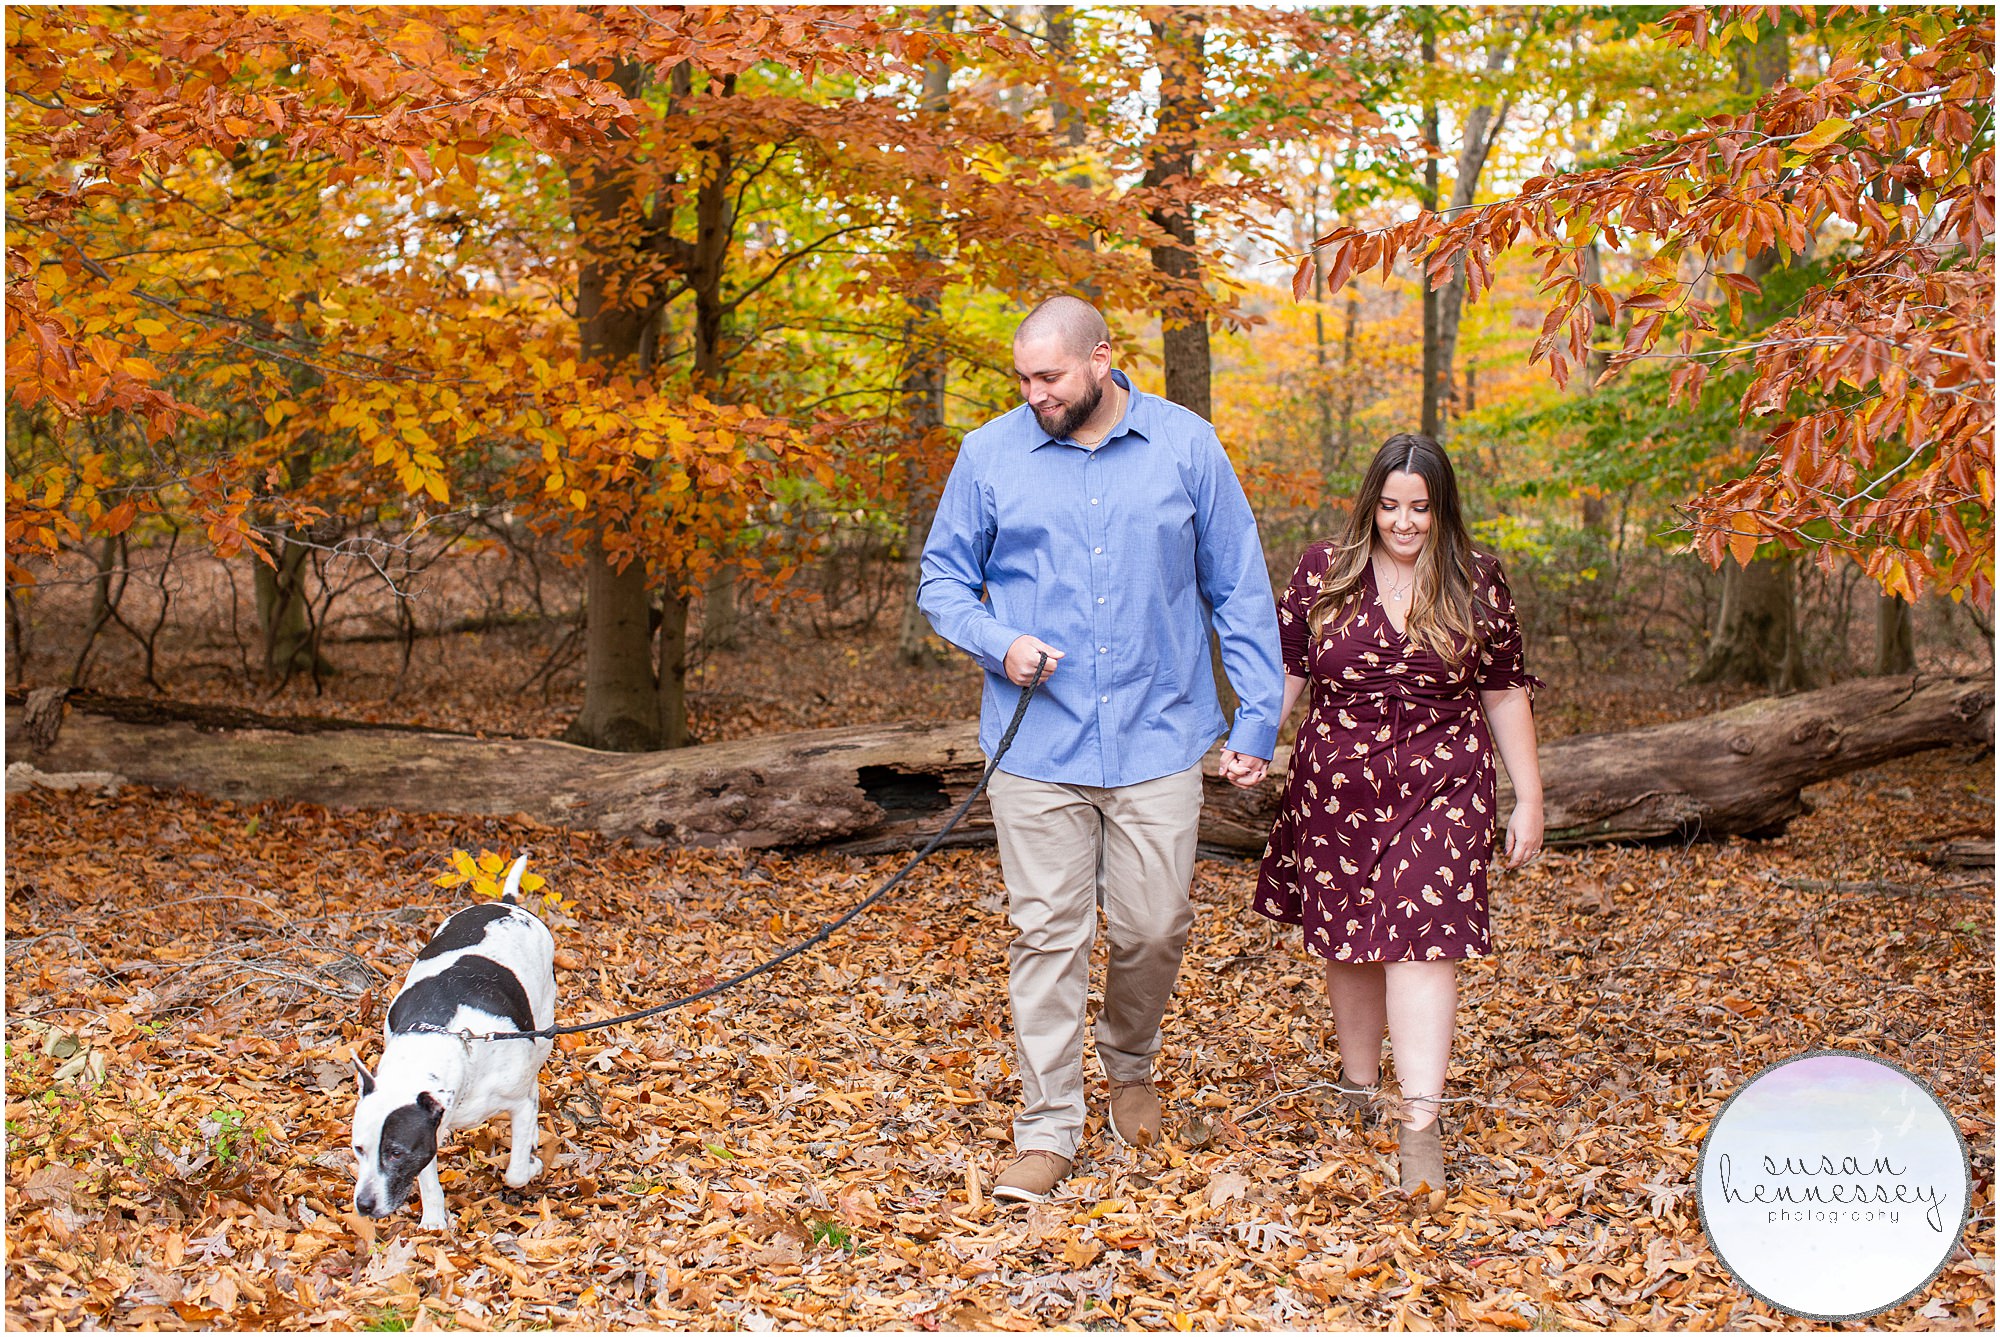 An engaged couple and their dog.